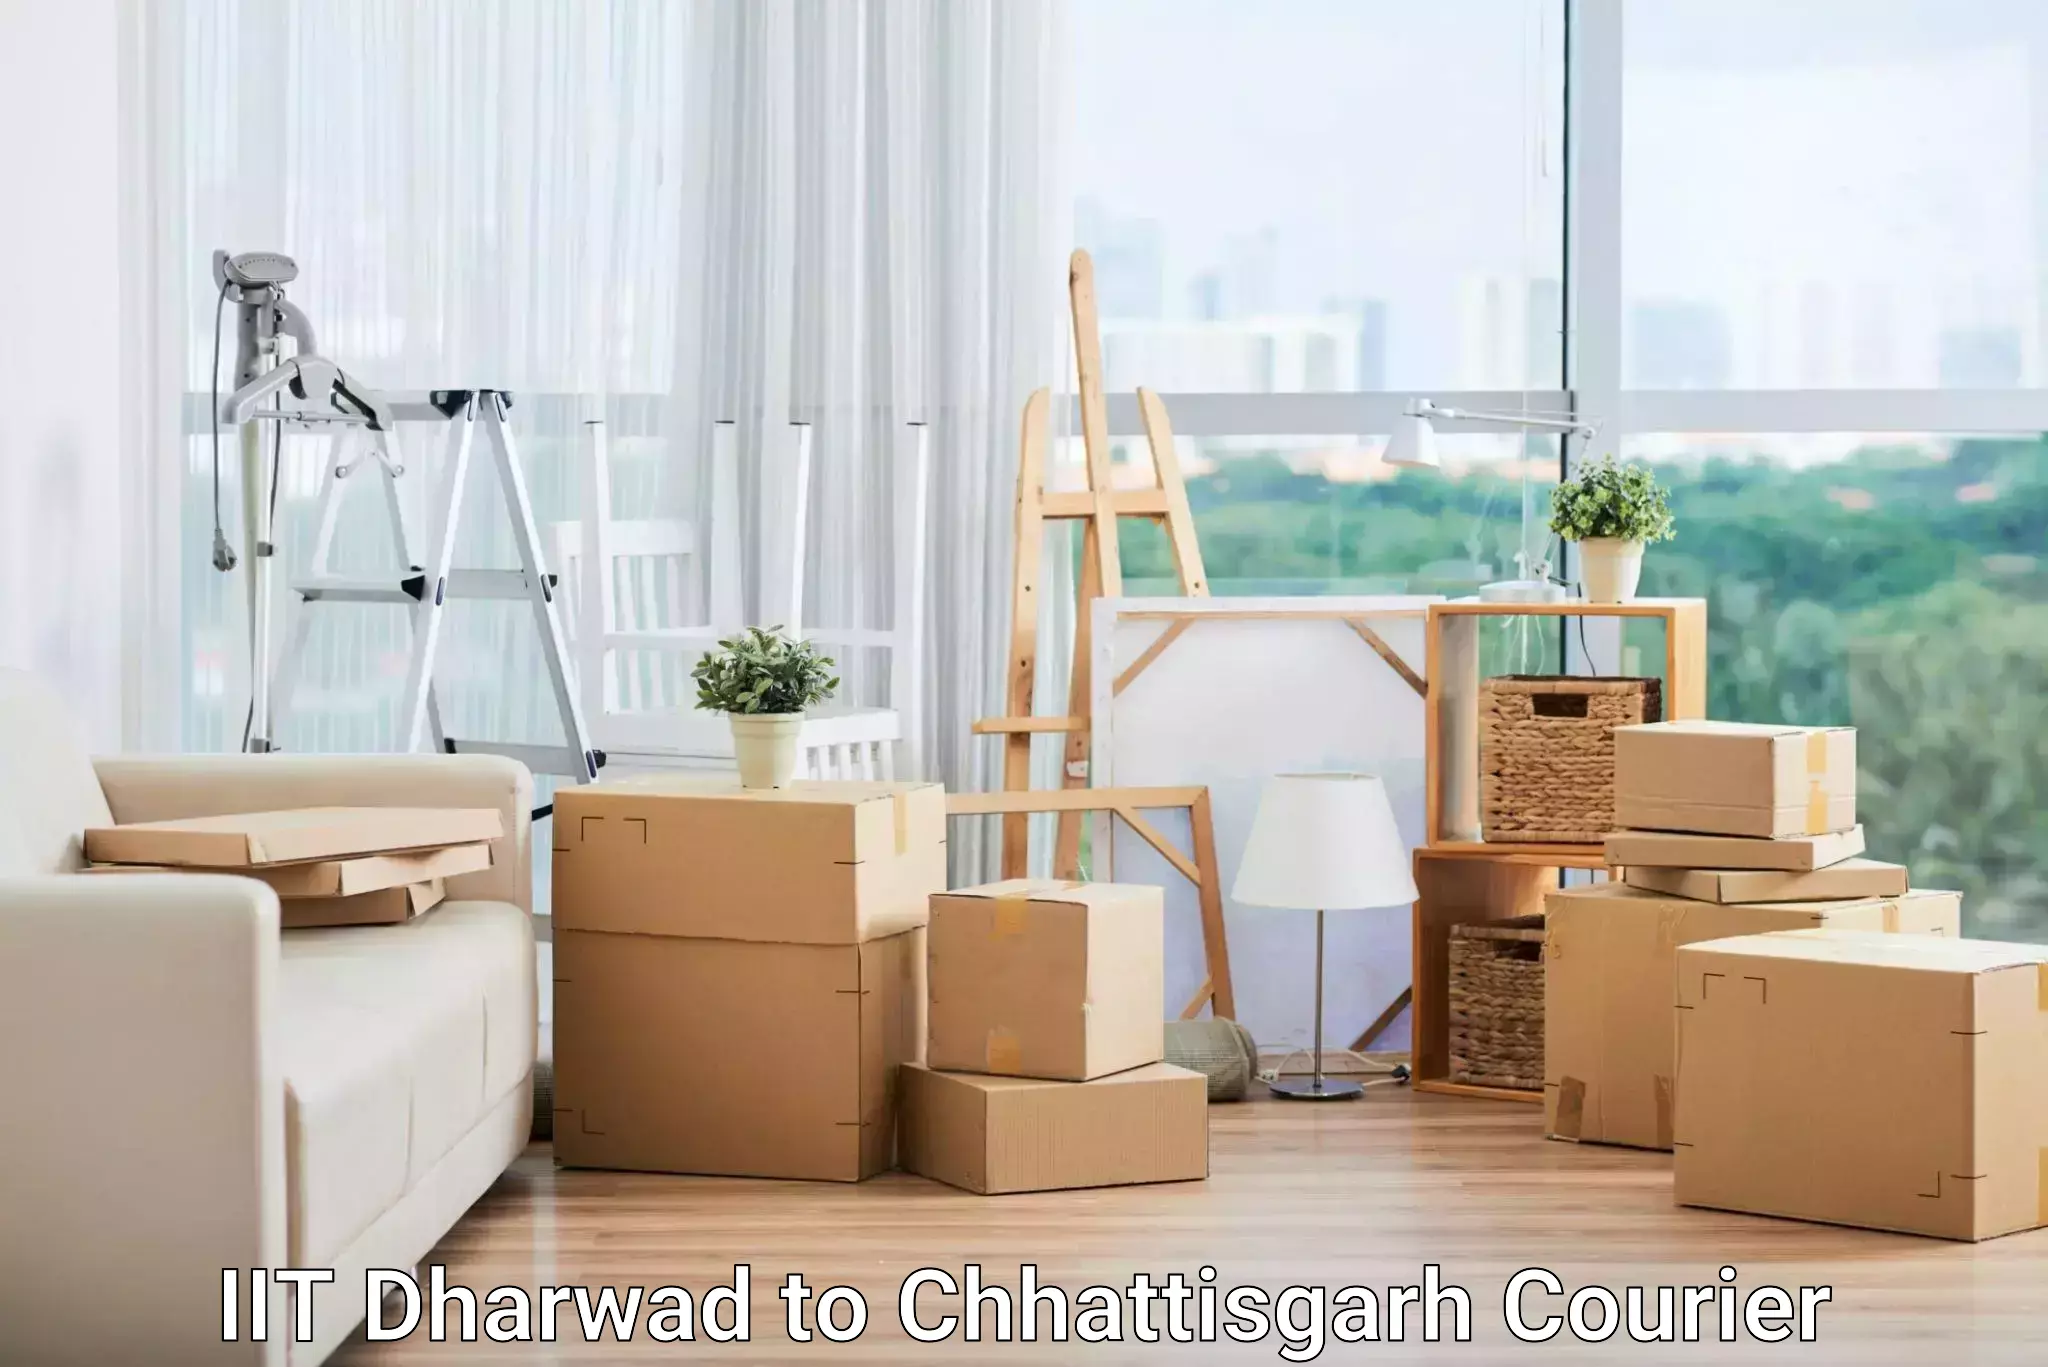 Parcel service for businesses IIT Dharwad to Chhattisgarh